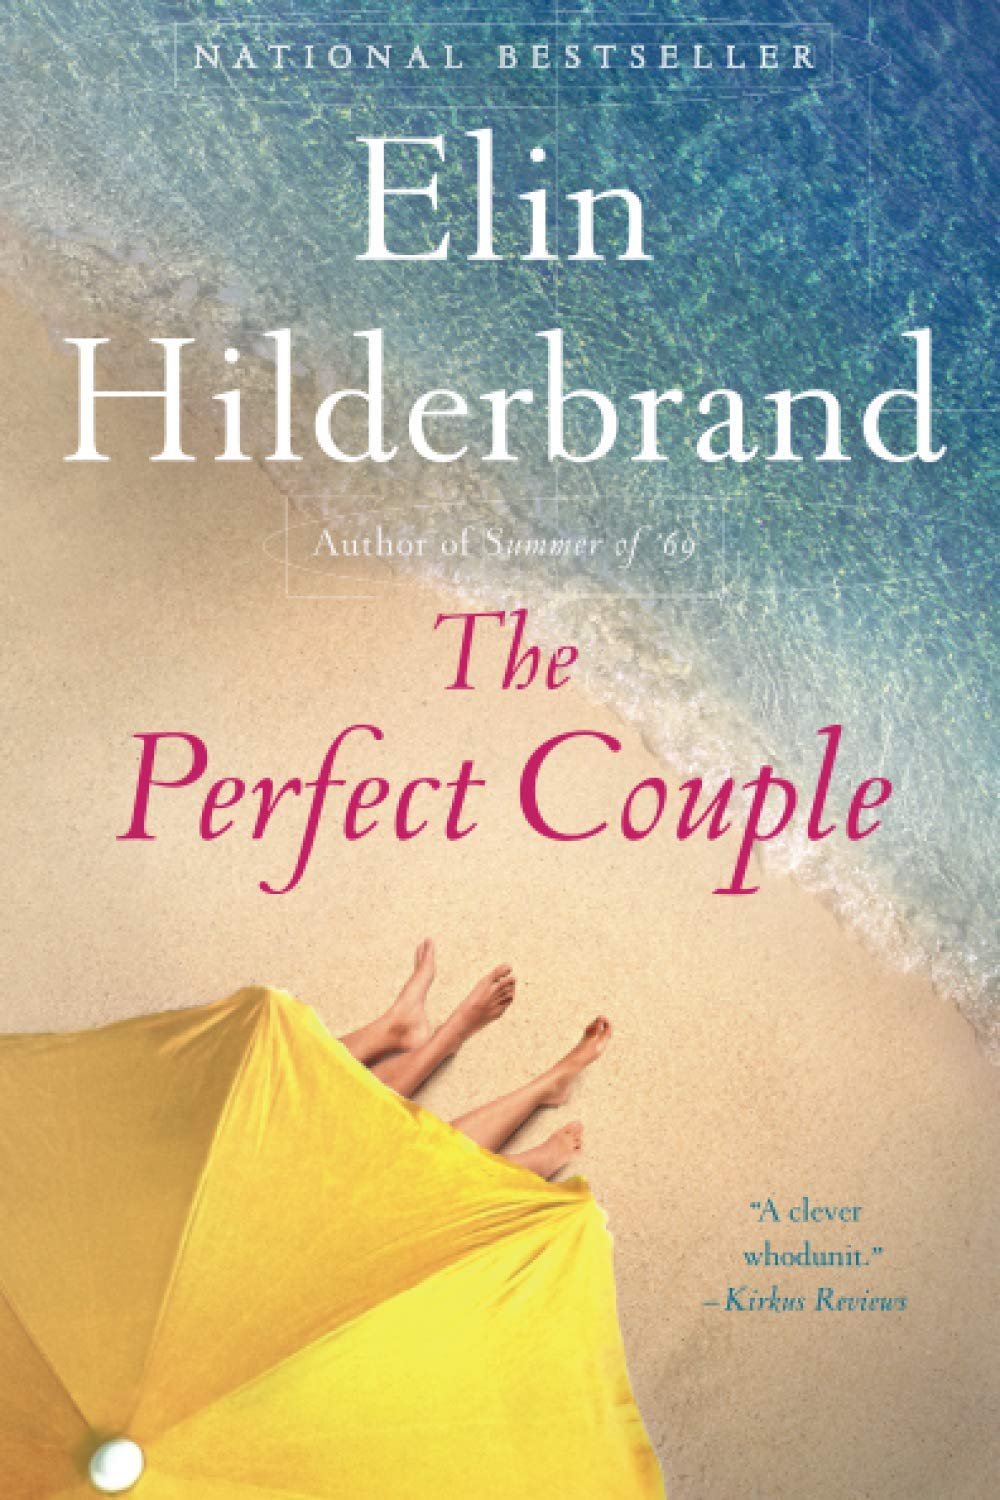 The Perfect Couple by elin hilderbrand.jpeg